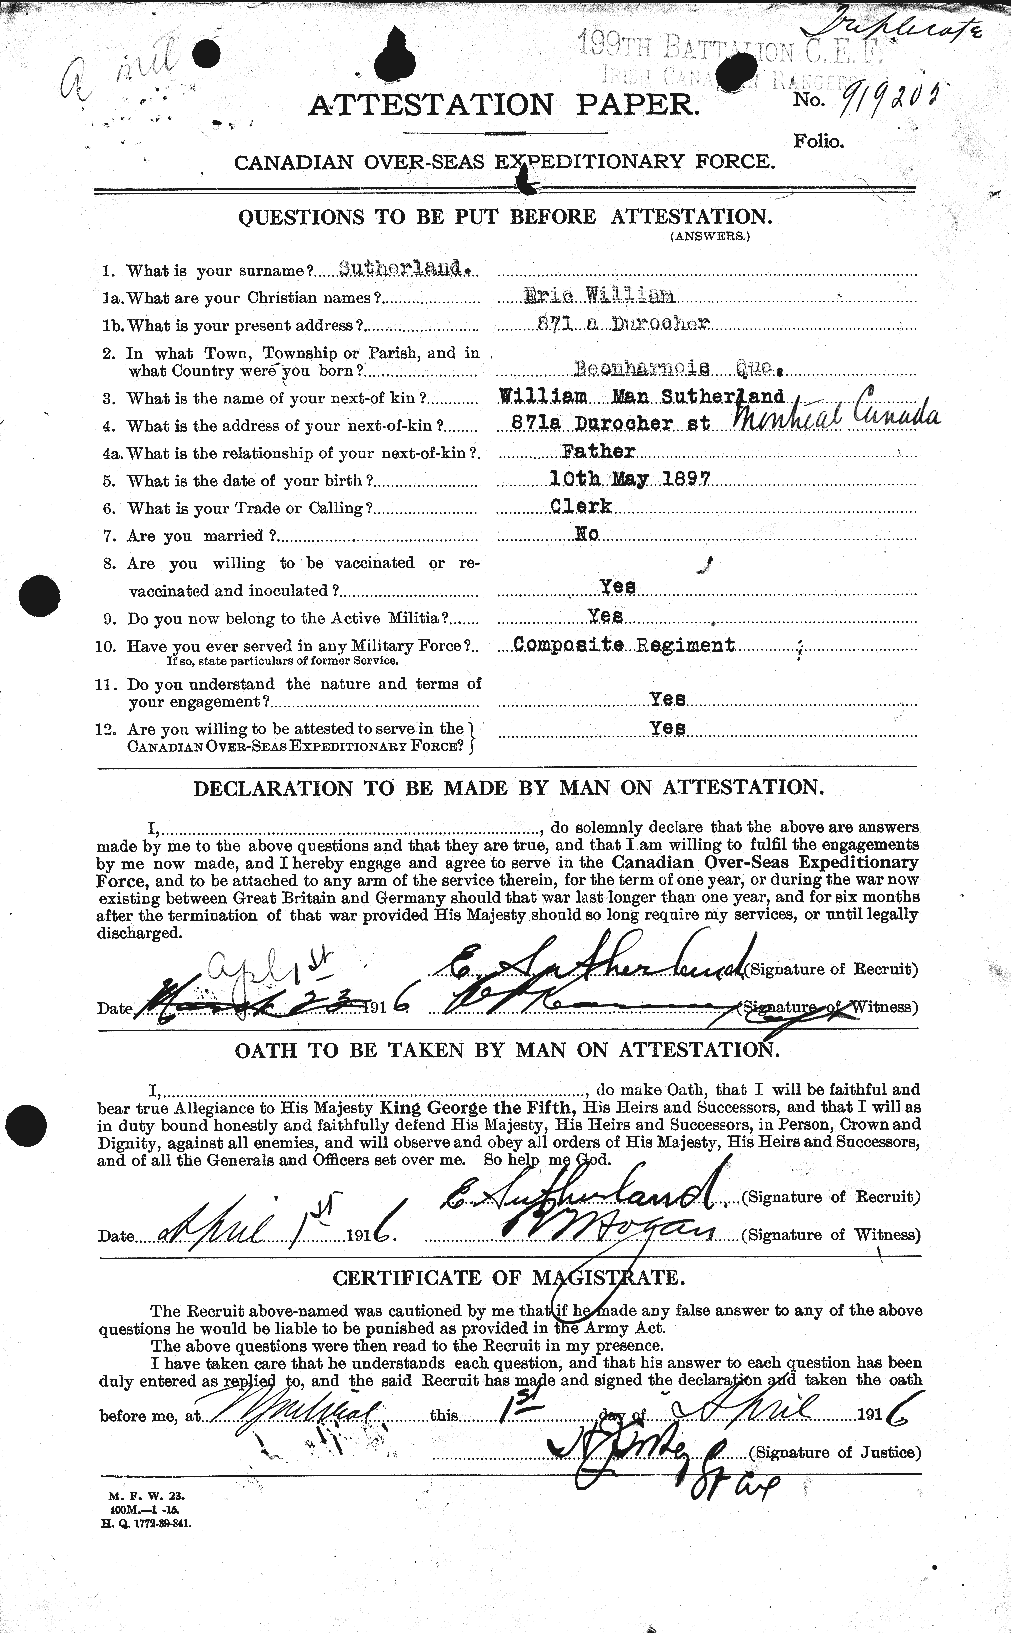 Personnel Records of the First World War - CEF 124897a